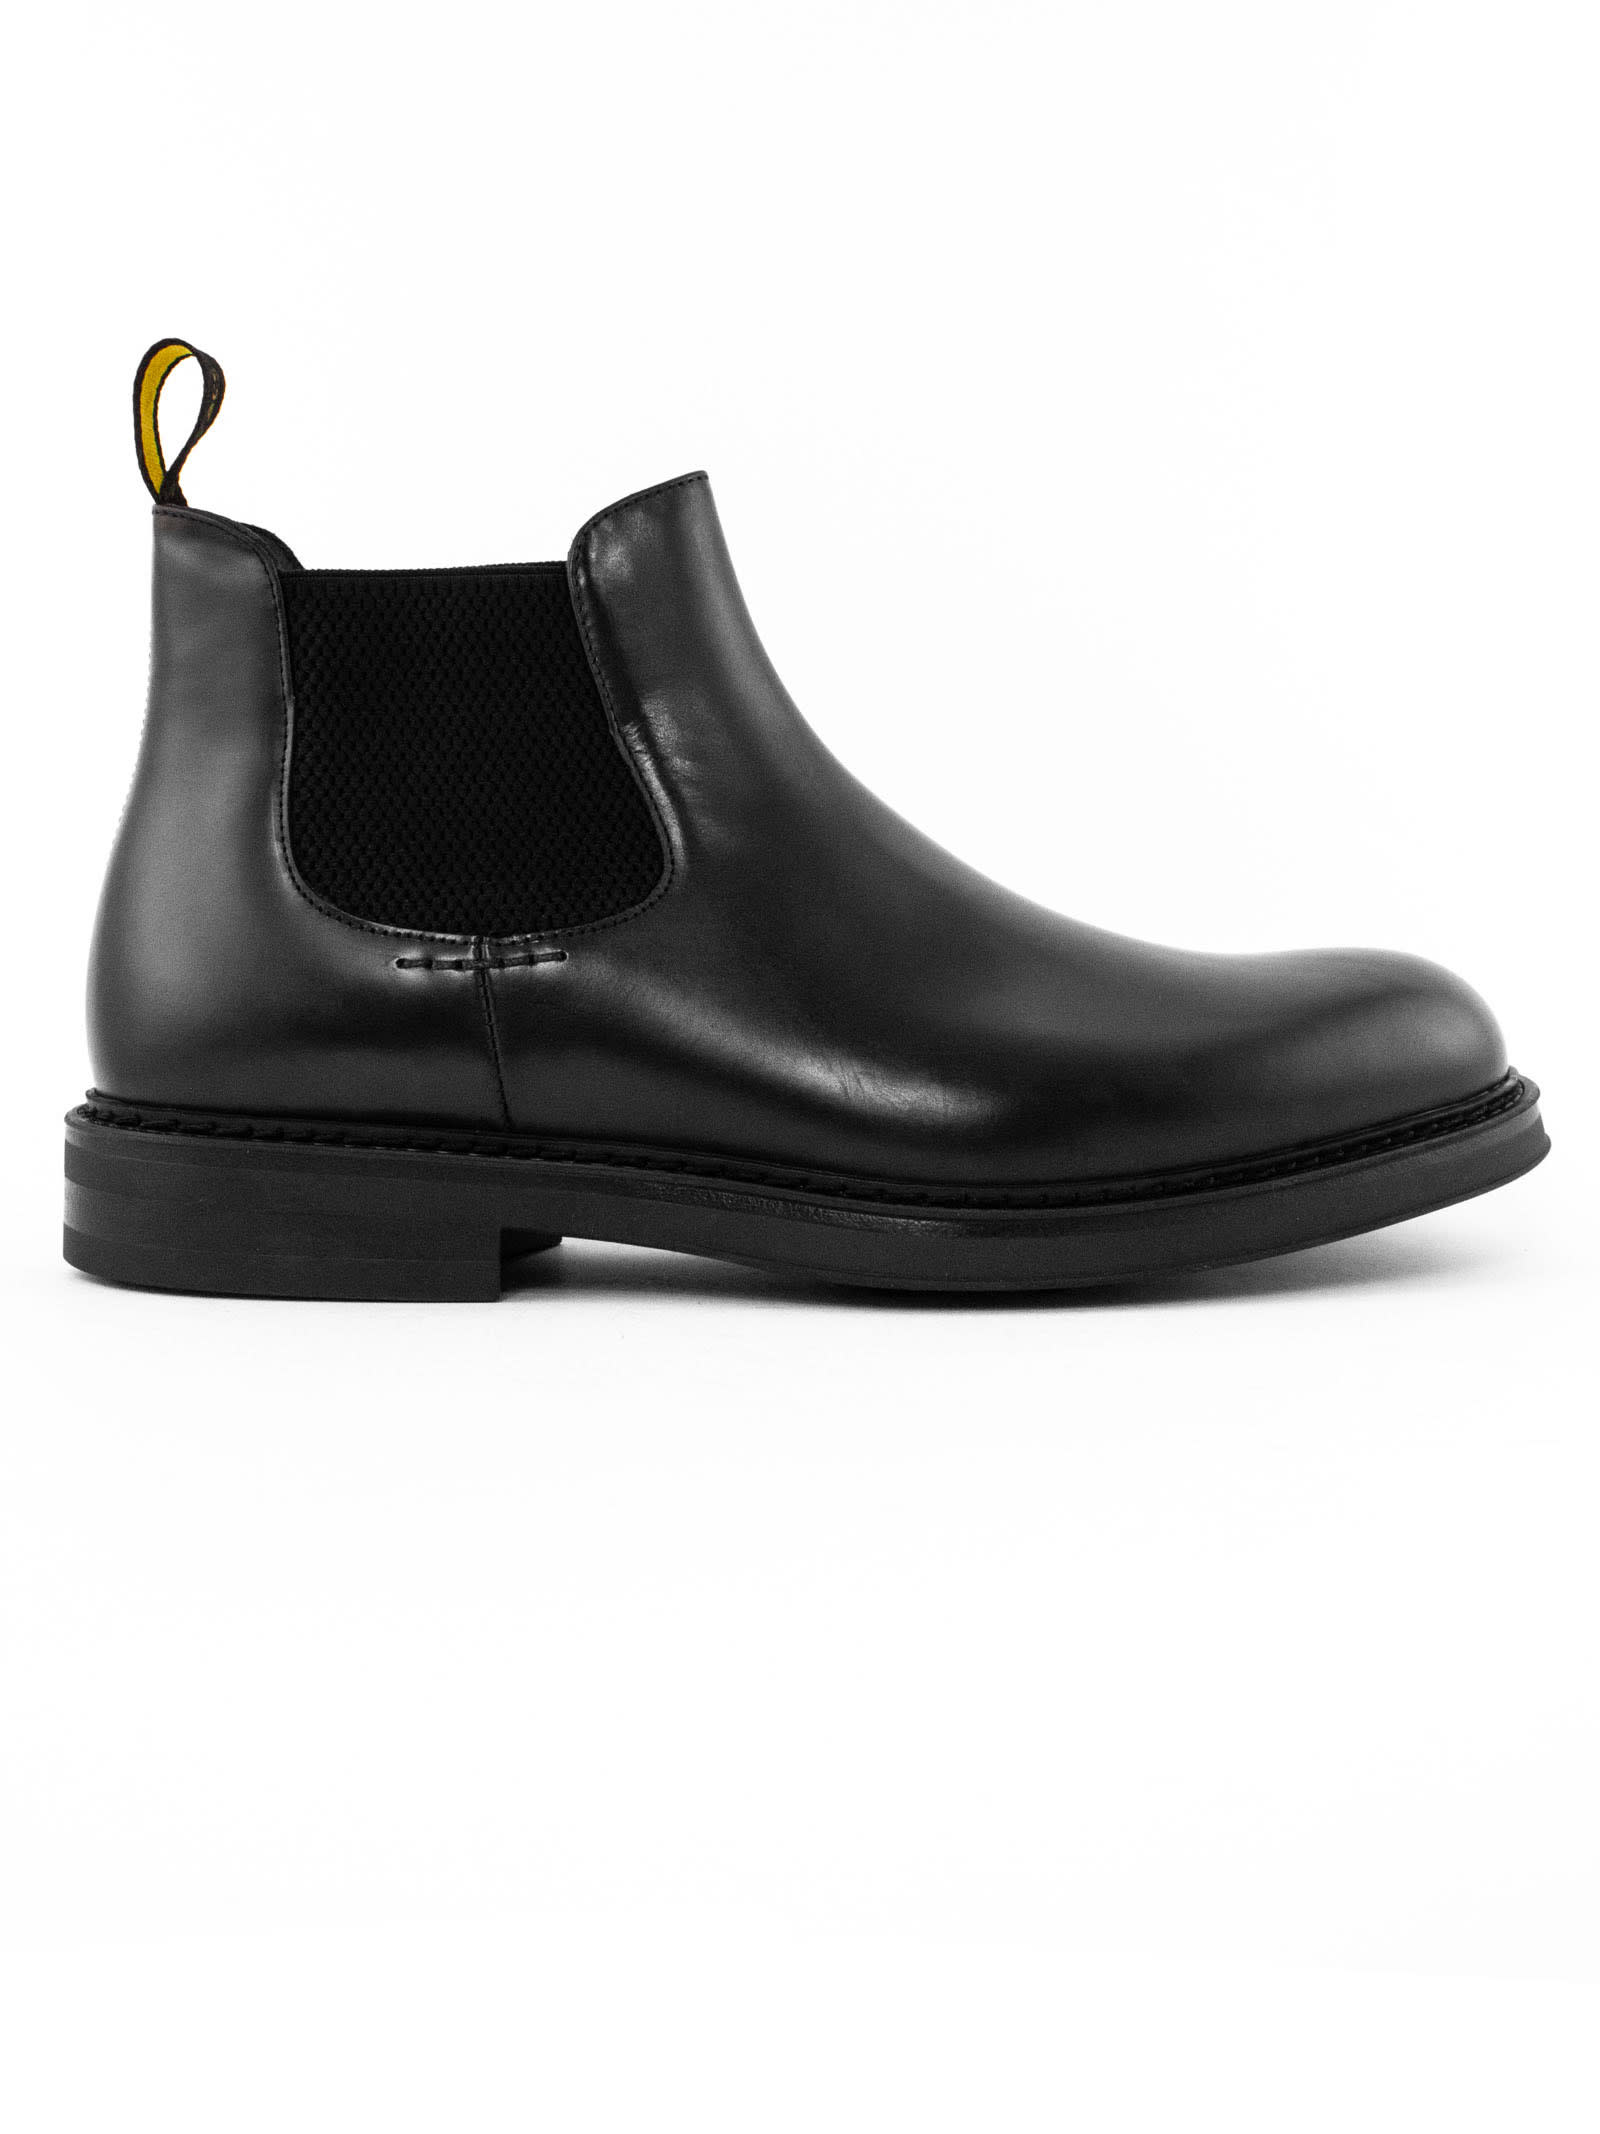 Doucals Black Smooth Leather Ankle Boot